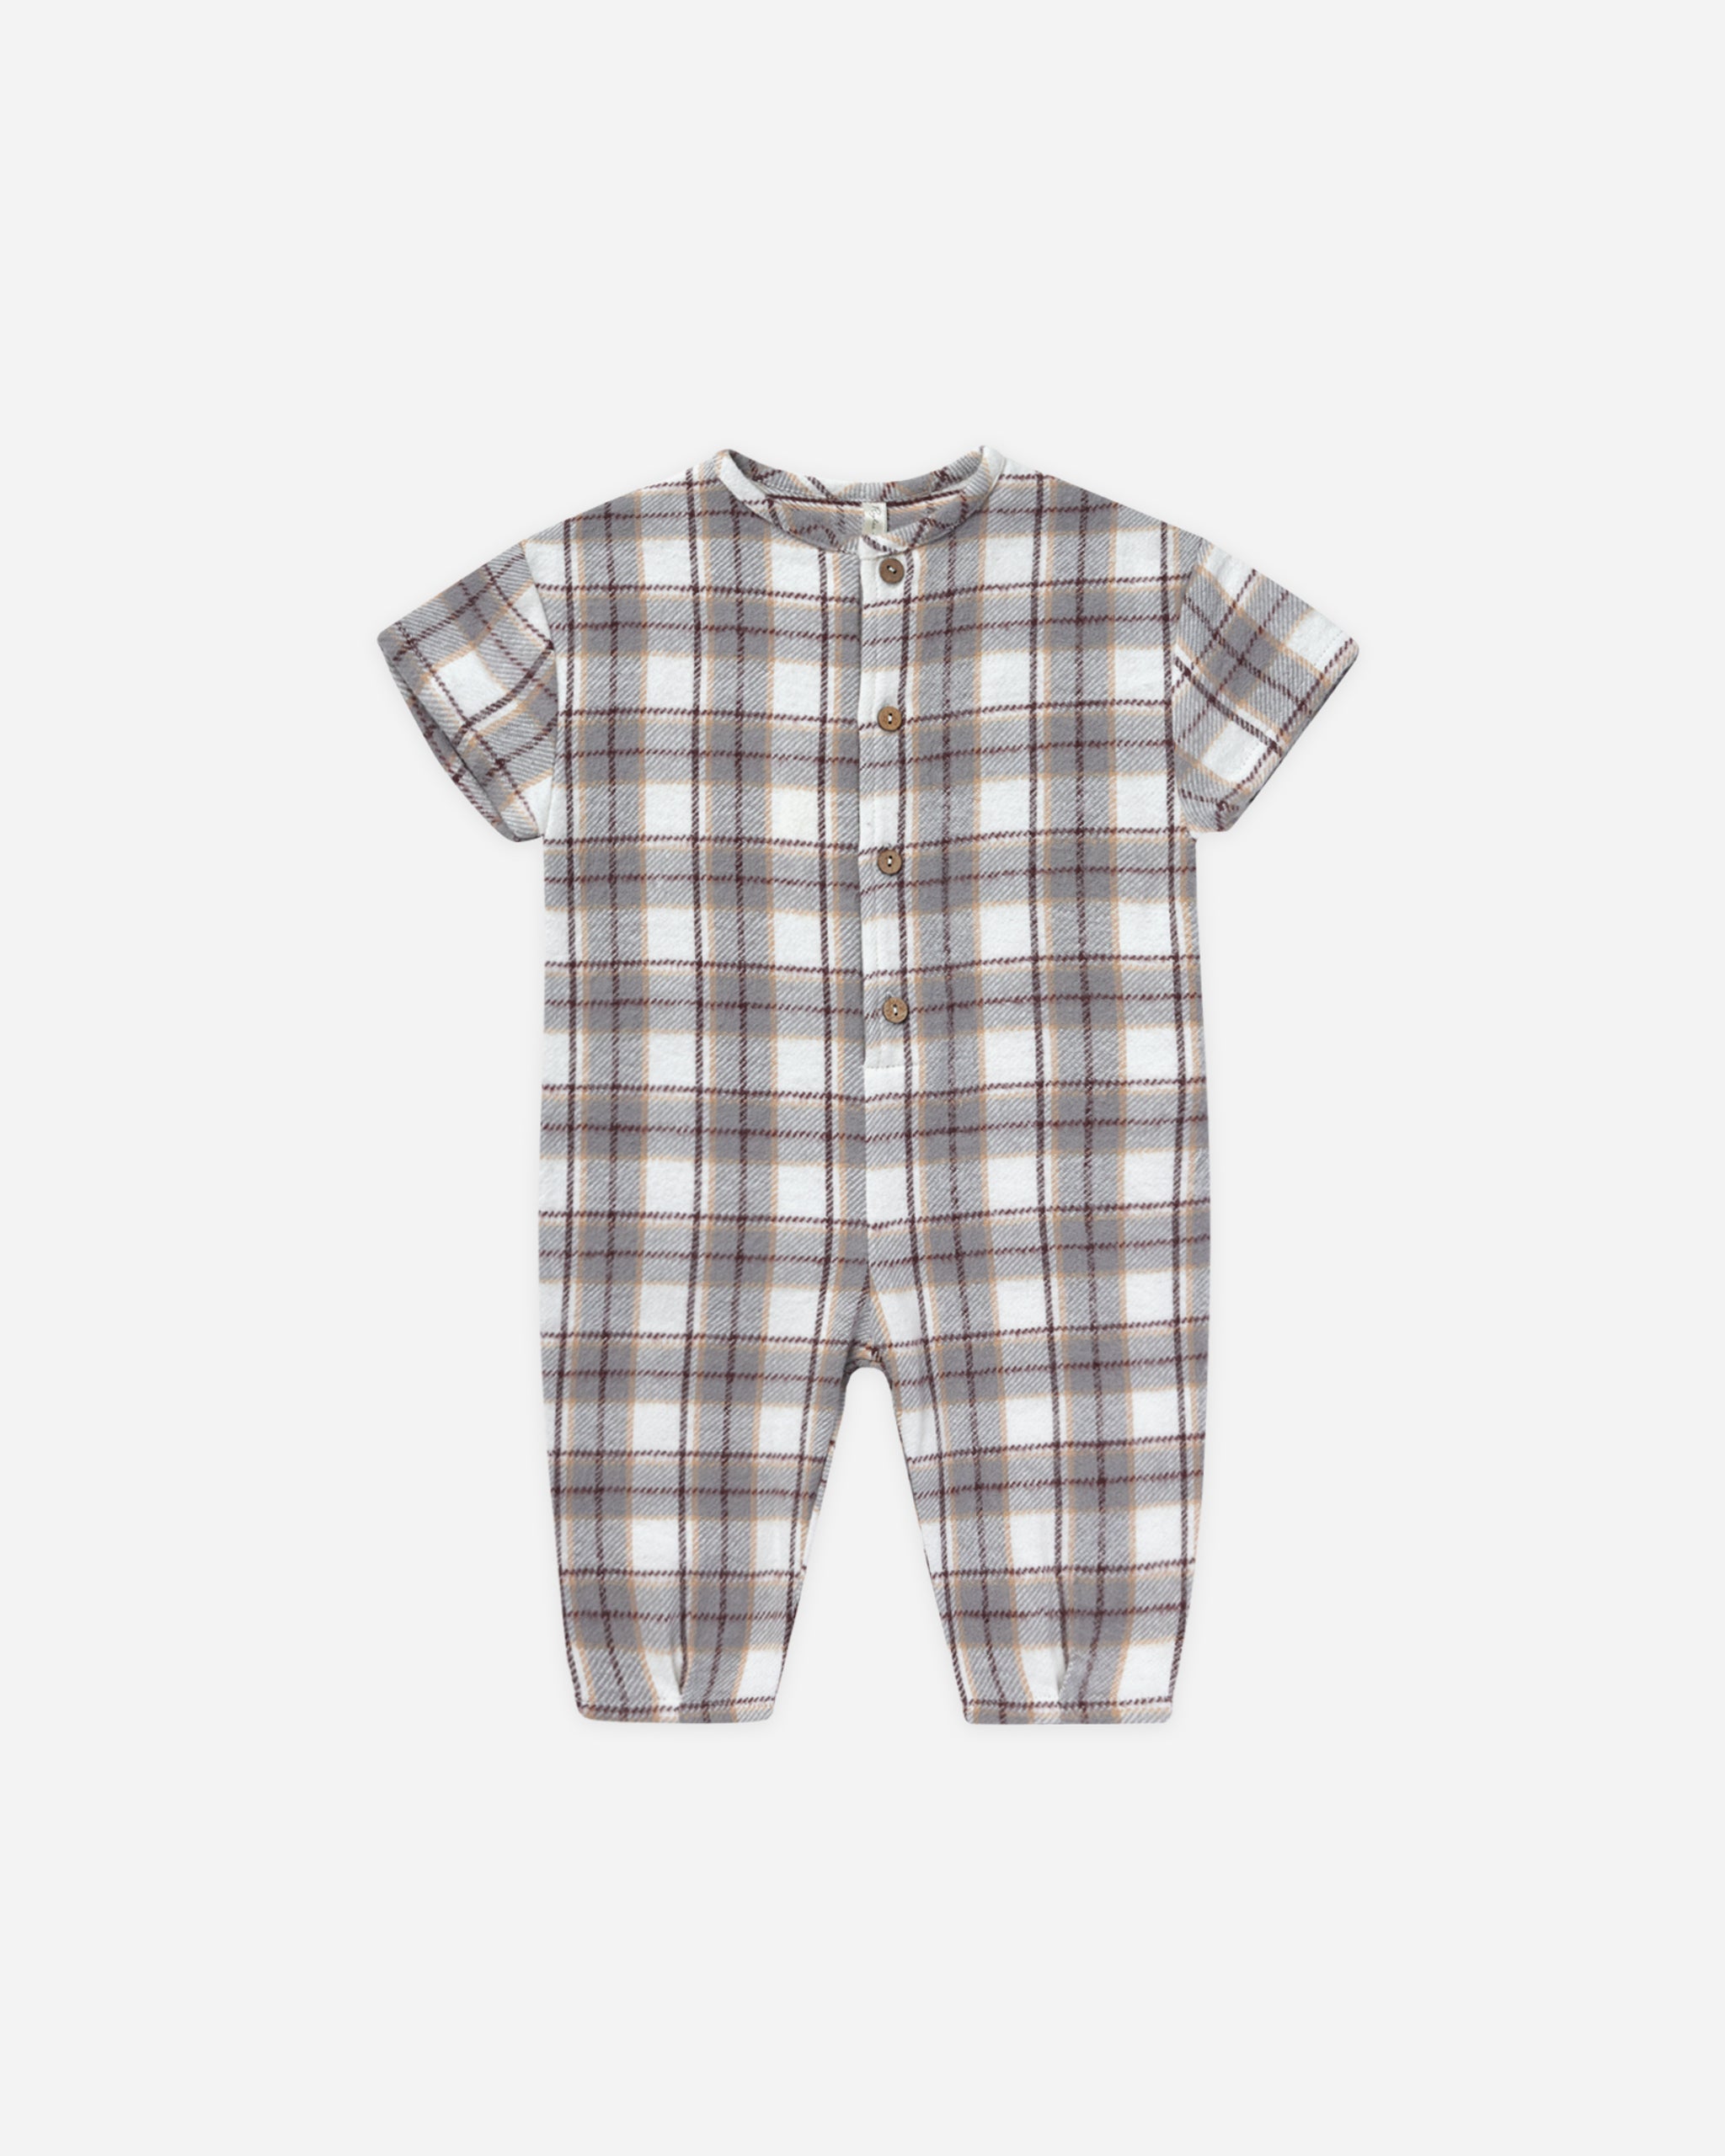 Hayes Jumpsuit || Blue Flannel - Rylee + Cru | Kids Clothes | Trendy Baby Clothes | Modern Infant Outfits |